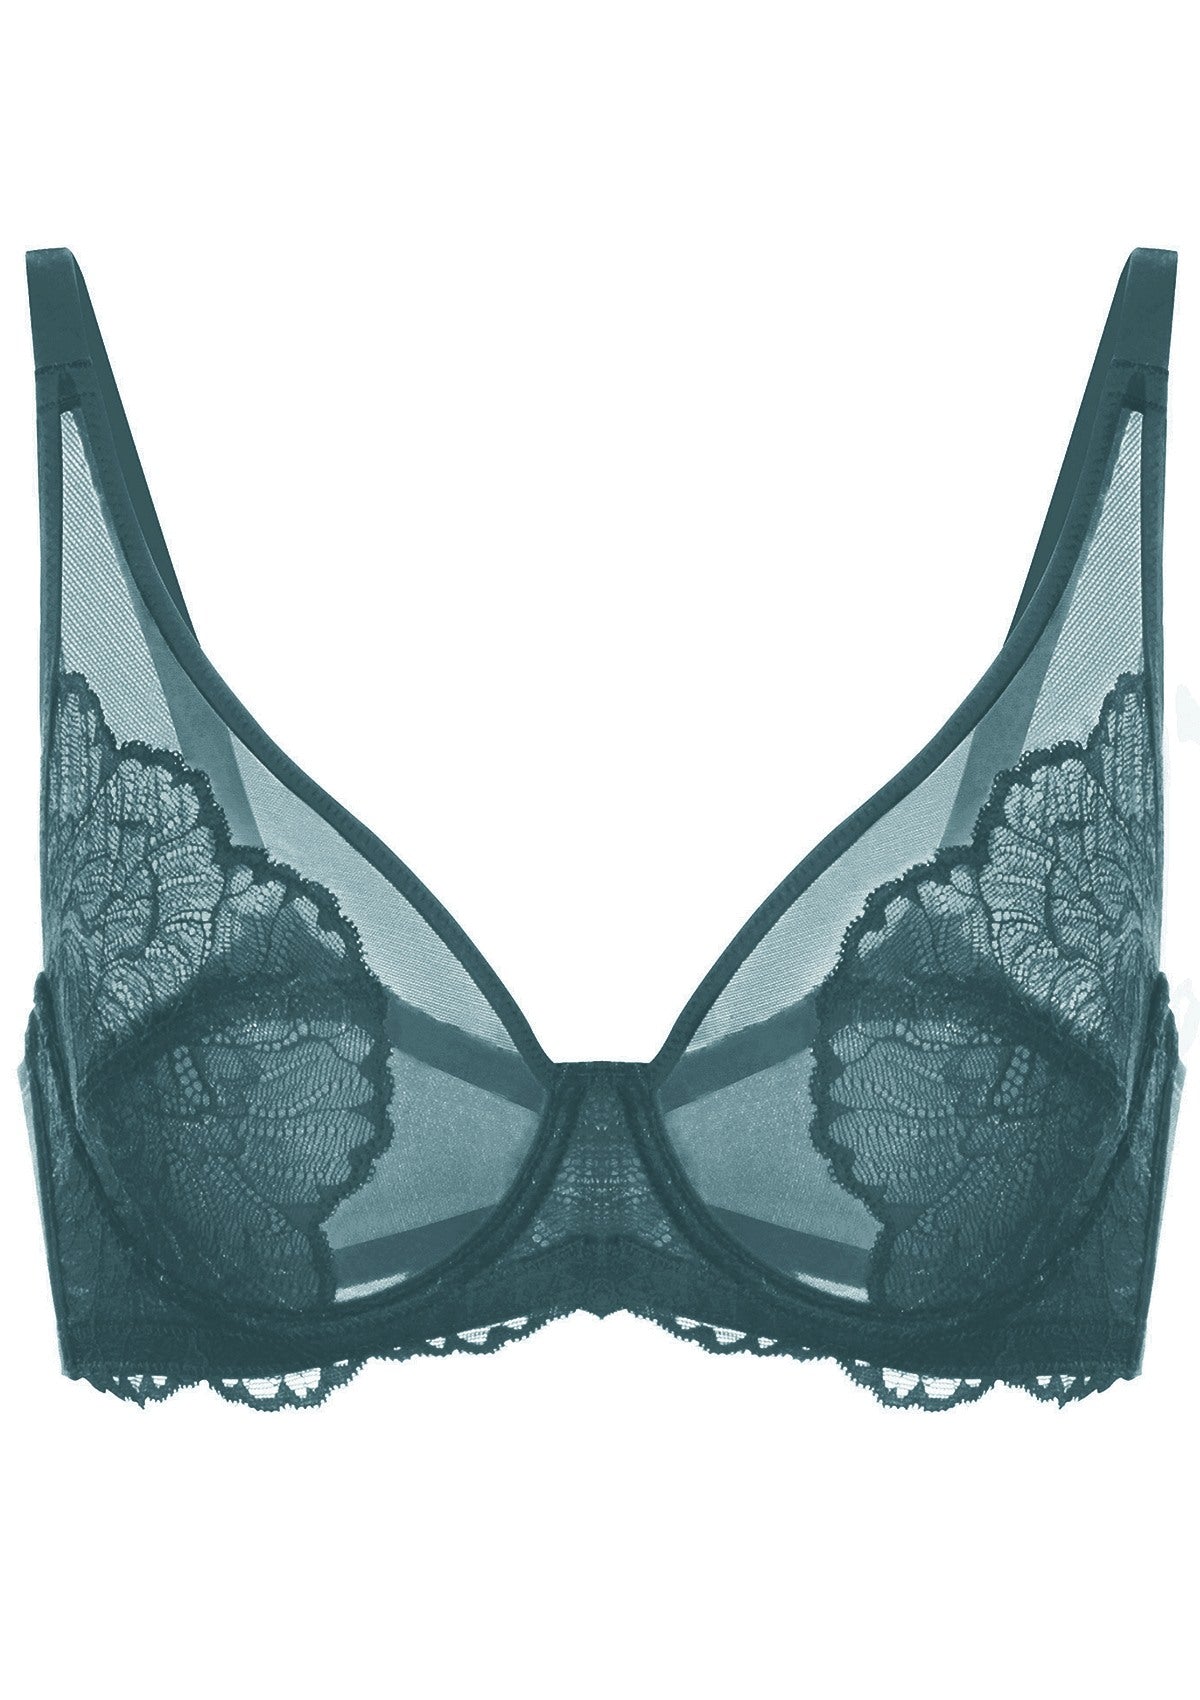 HSIA Blossom Full Figure See-Through Lace Bra For Side And Back Fat - Balsam Blue / 44 / DDD/F